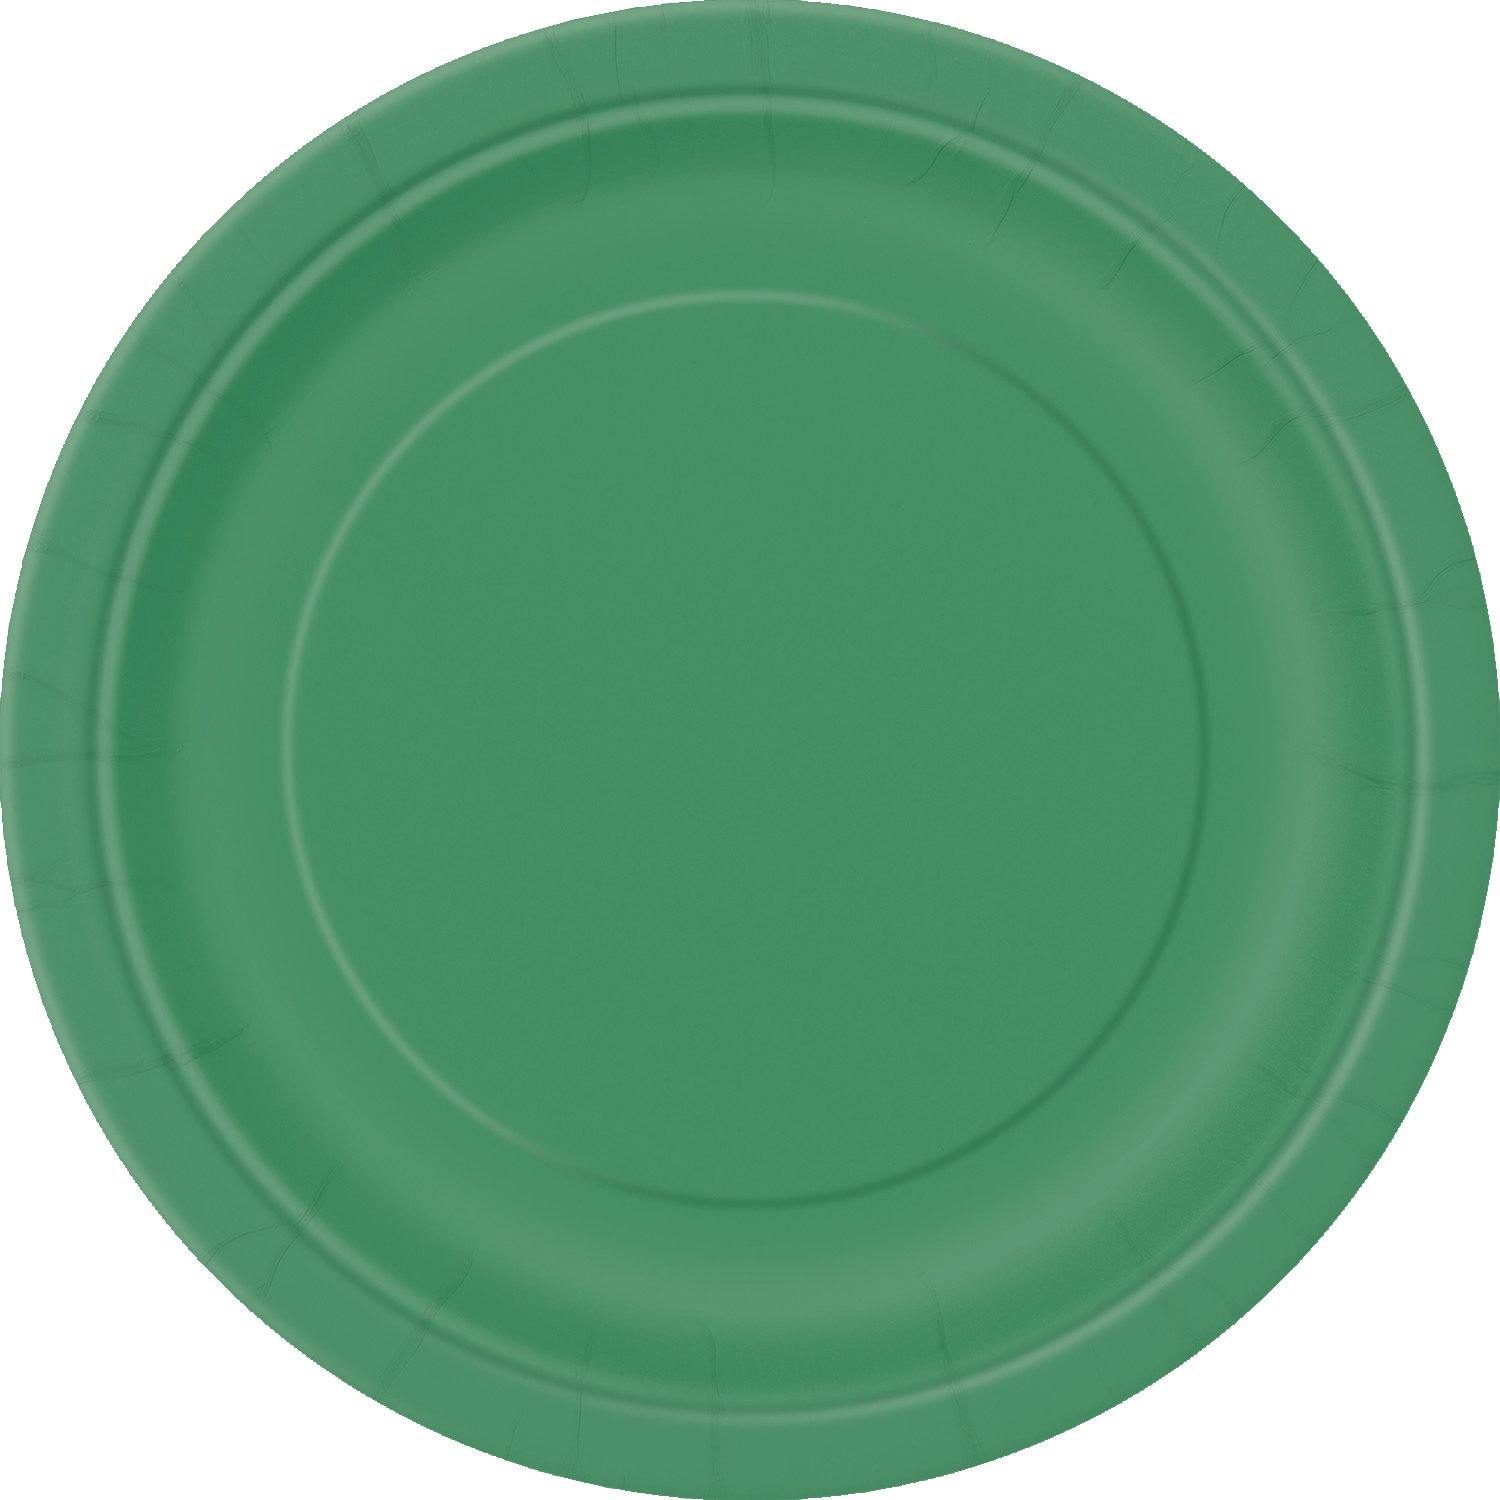 8 Pack Emerald Green Paper Plates - 23cm - The Base Warehouse